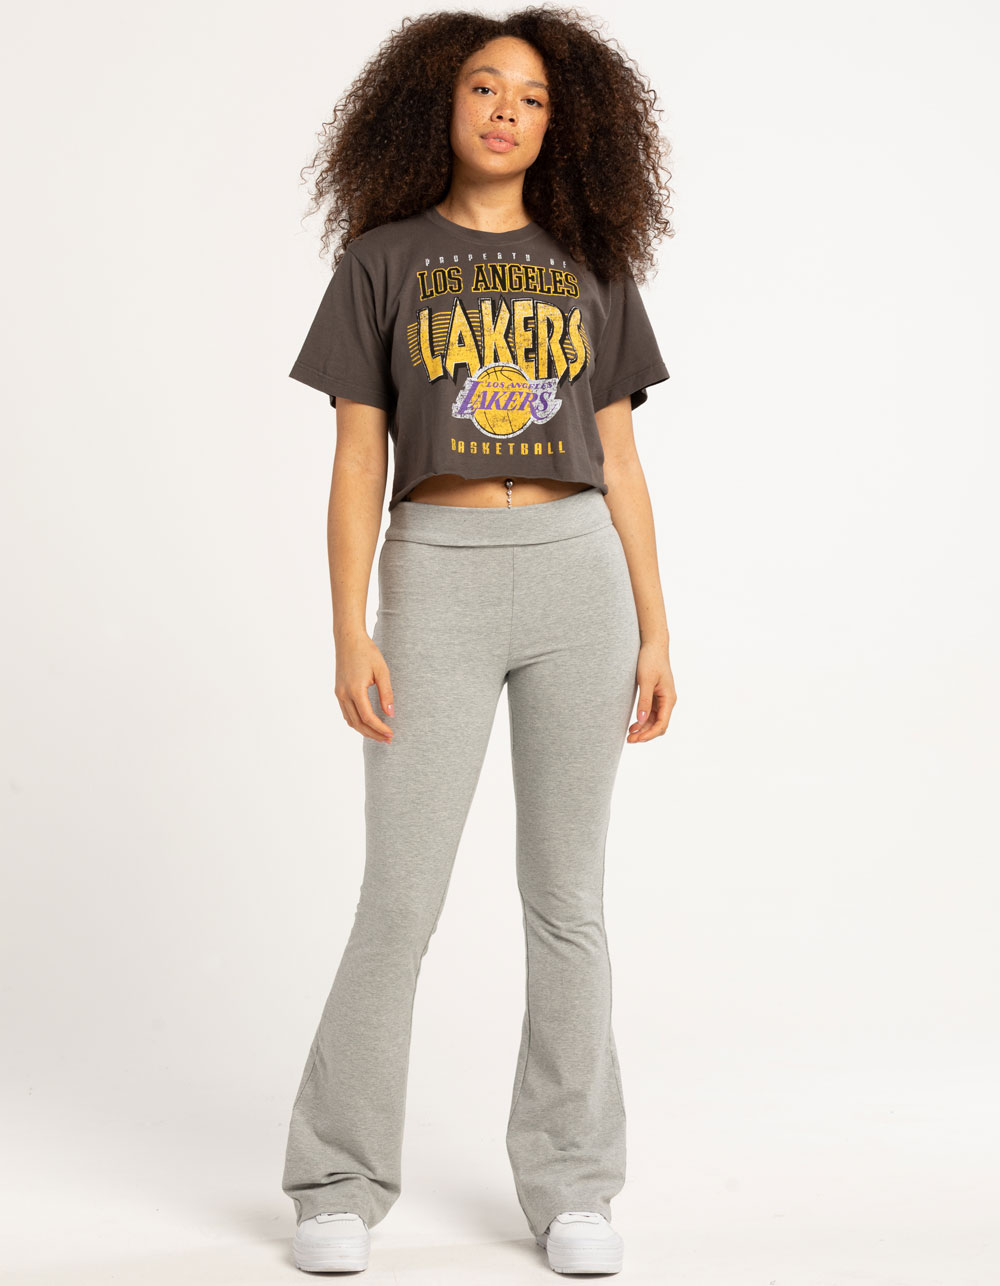 Women's Majestic Threads White Los Angeles Lakers Drip Gloss Crop Top